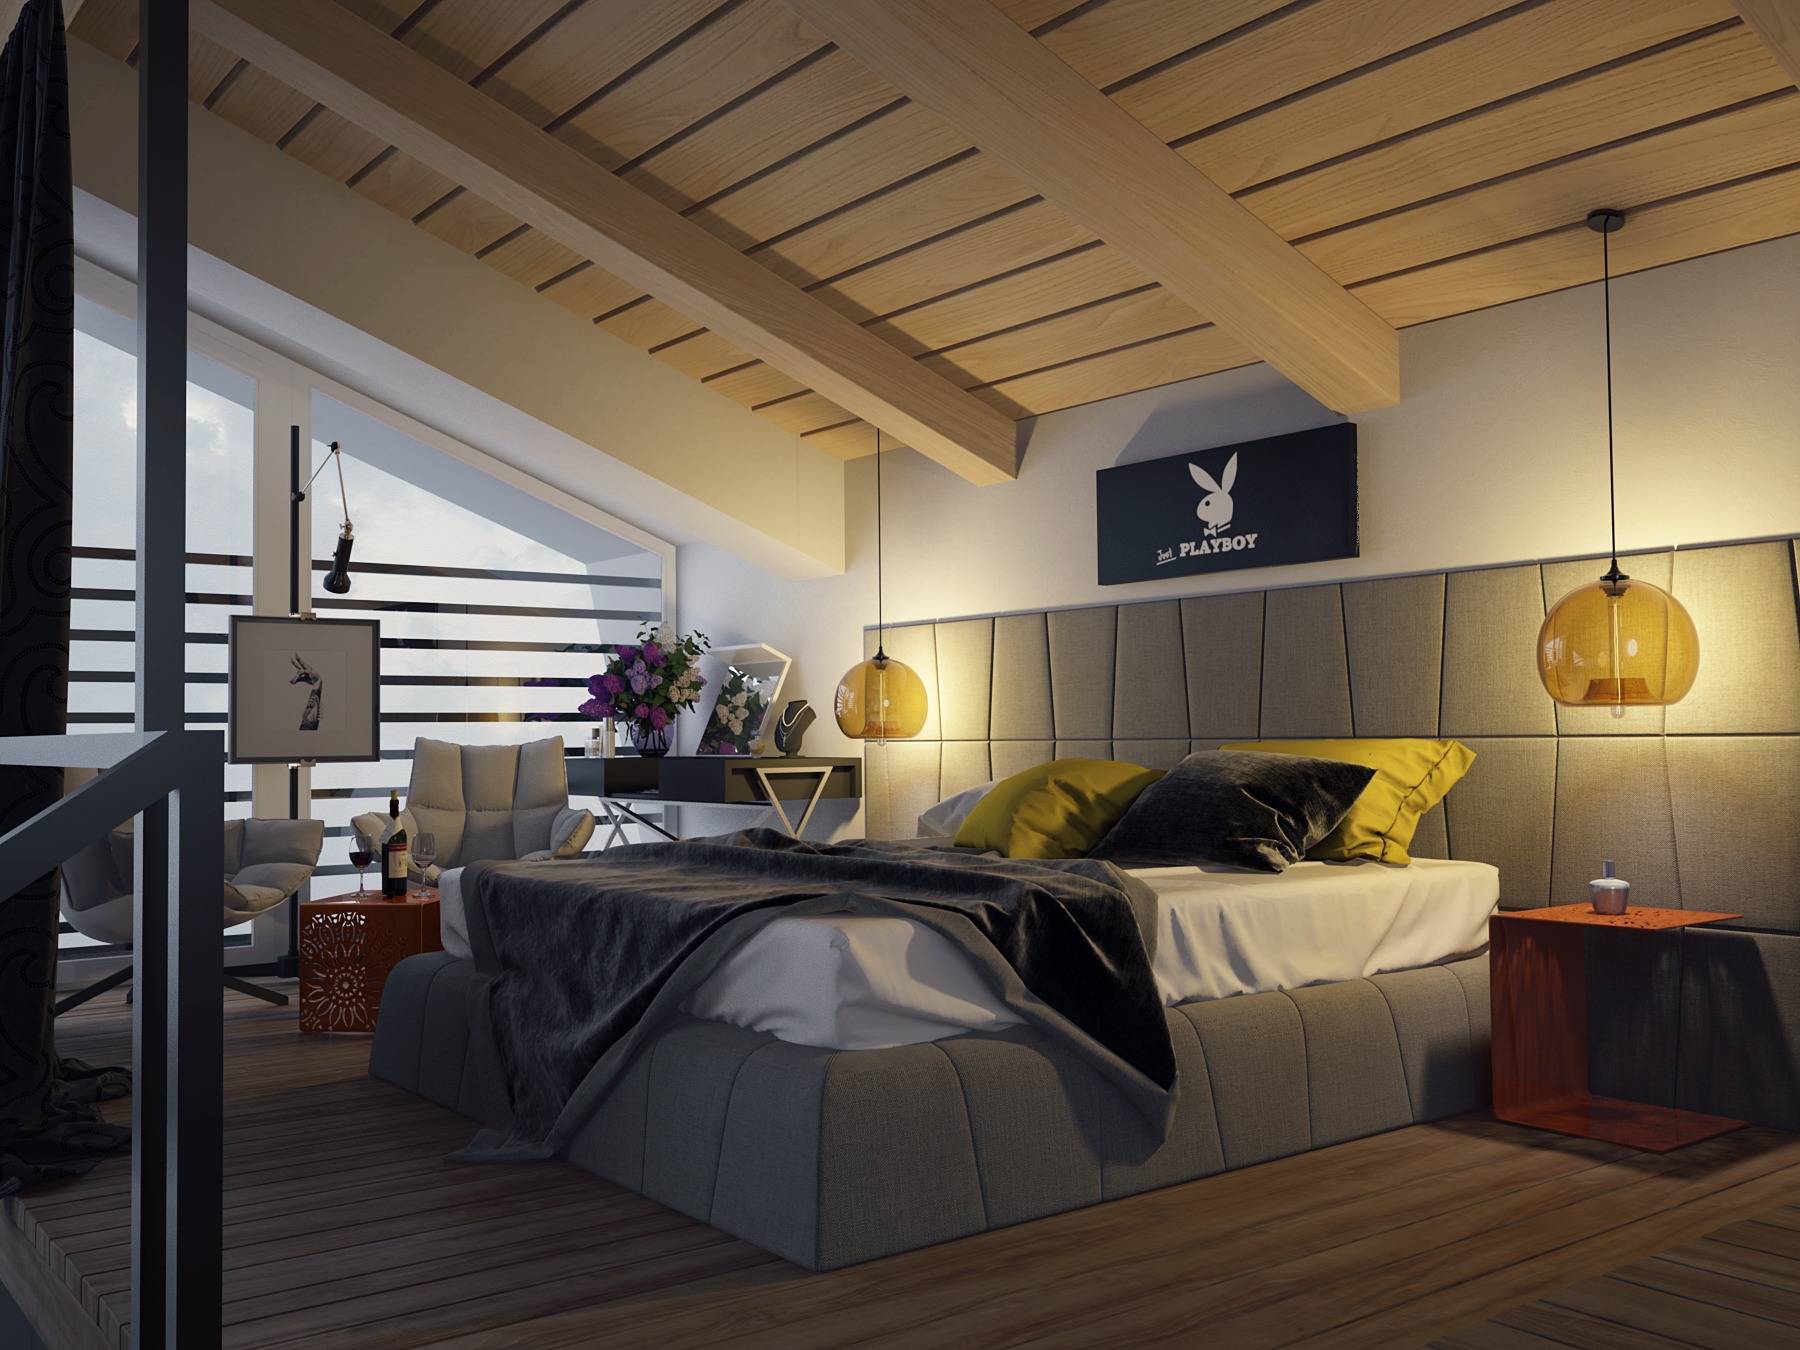 Design ideas for the master bedroom "width =" 1800 "height =" 1350 "srcset =" https://mileray.com/wp-content/uploads/2020/05/1588511235_871_10-Beautiful-Master-Bedroom-Design-Ideas-For-Couple.jpg 1800w, https: // myfashionos .com / wp-content / uploads / 2016/05 / Alexander-Simakov-1-300x225.jpg 300w, https://mileray.com/wp-content/uploads/2016/05/Alexander-Simakov-1-768x576. jpg 768w, https://mileray.com/wp-content/uploads/2016/05/Alexander-Simakov-1-1024x768.jpg 1024w, https://mileray.com/wp-content/uploads/2016/05/ Alexander-Simakov-1-80x60.jpg 80w, https://mileray.com/wp-content/uploads/2016/05/Alexander-Simakov-1-265x198.jpg 265w, https://mileray.com/wp- content / uploads / 2016/05 / Alexander-Simakov-1-696x522.jpg 696w, https://mileray.com/wp-content/uploads/2016/05/Alexander-Simakov-1-1068x801.jpg 1068w, https: //mileray.com/wp-content/uploads/2016/05/Alexander-Simakov-1-560x420.jpg 560w "sizes =" (maximum width: 1800px) 100vw, 1800px